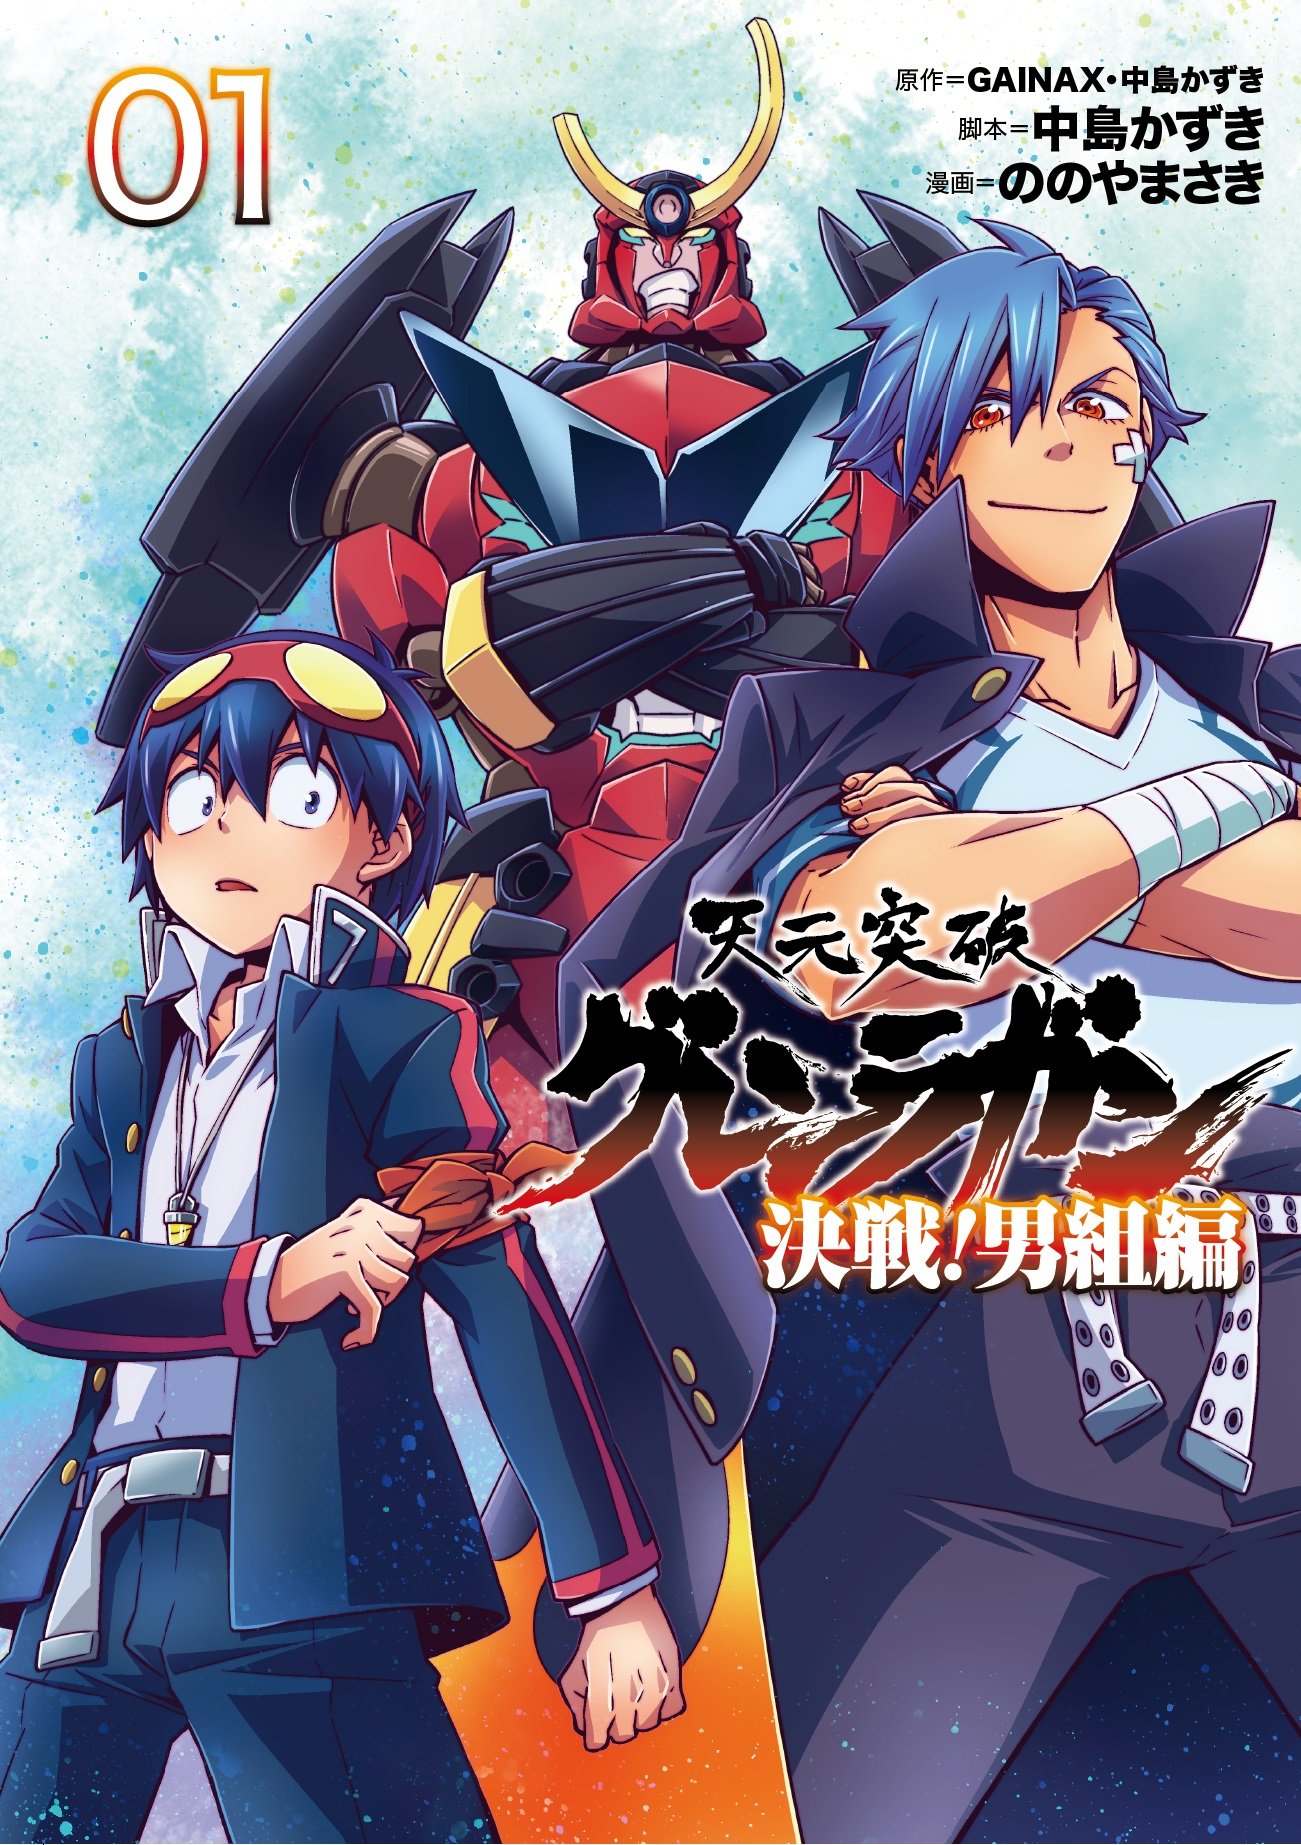 Gurren Lagann Wikia Tries To Explain The Physics Of It All, And It Is A  TRIP